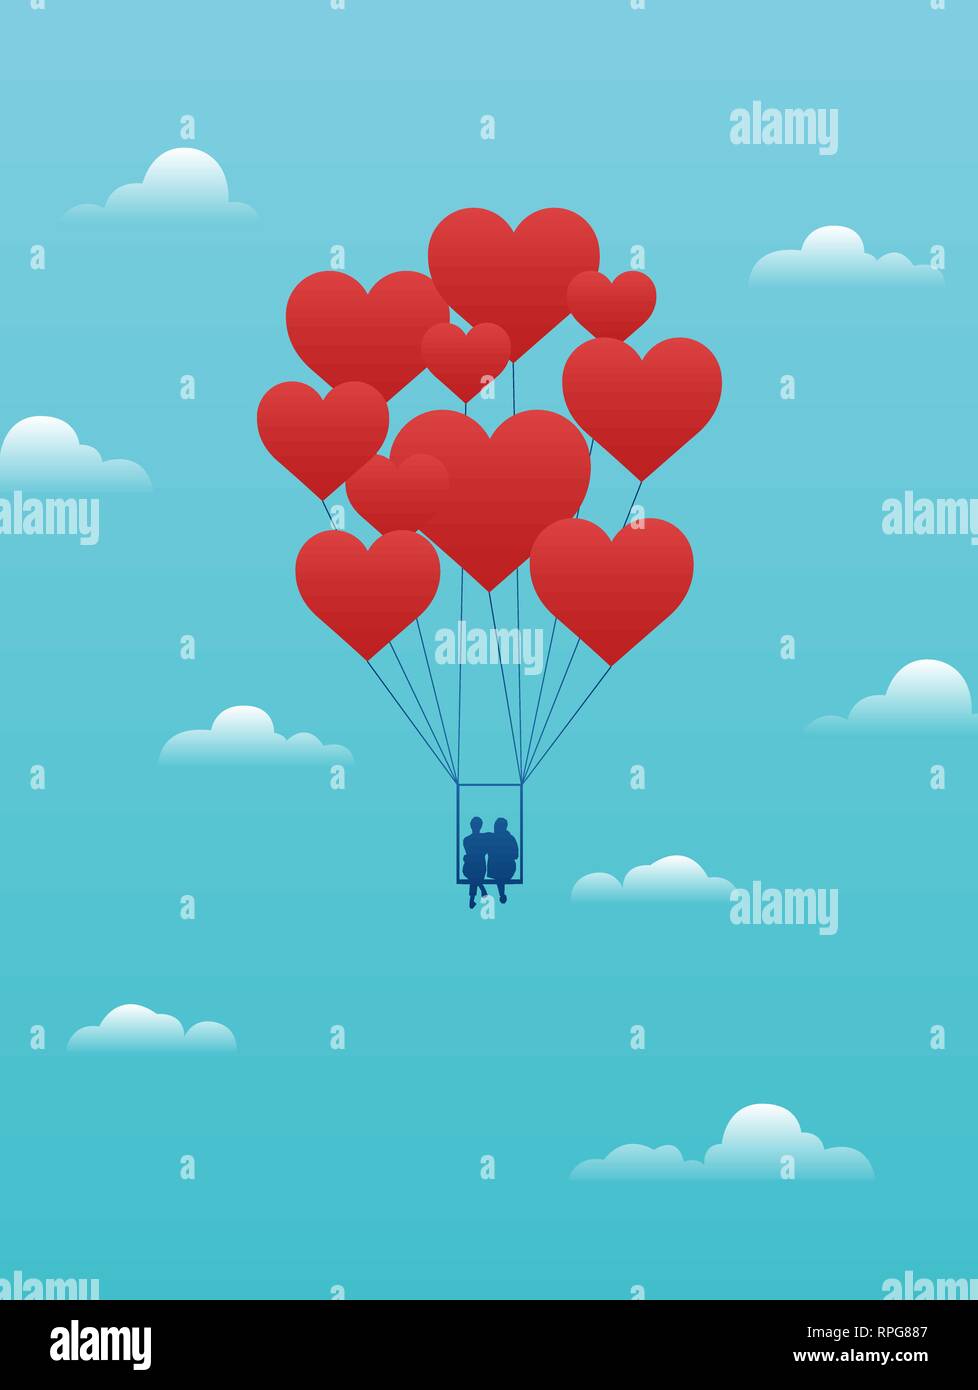 Vector valentine day card with couple on swing carried away by red heart balloons. Stock Vector